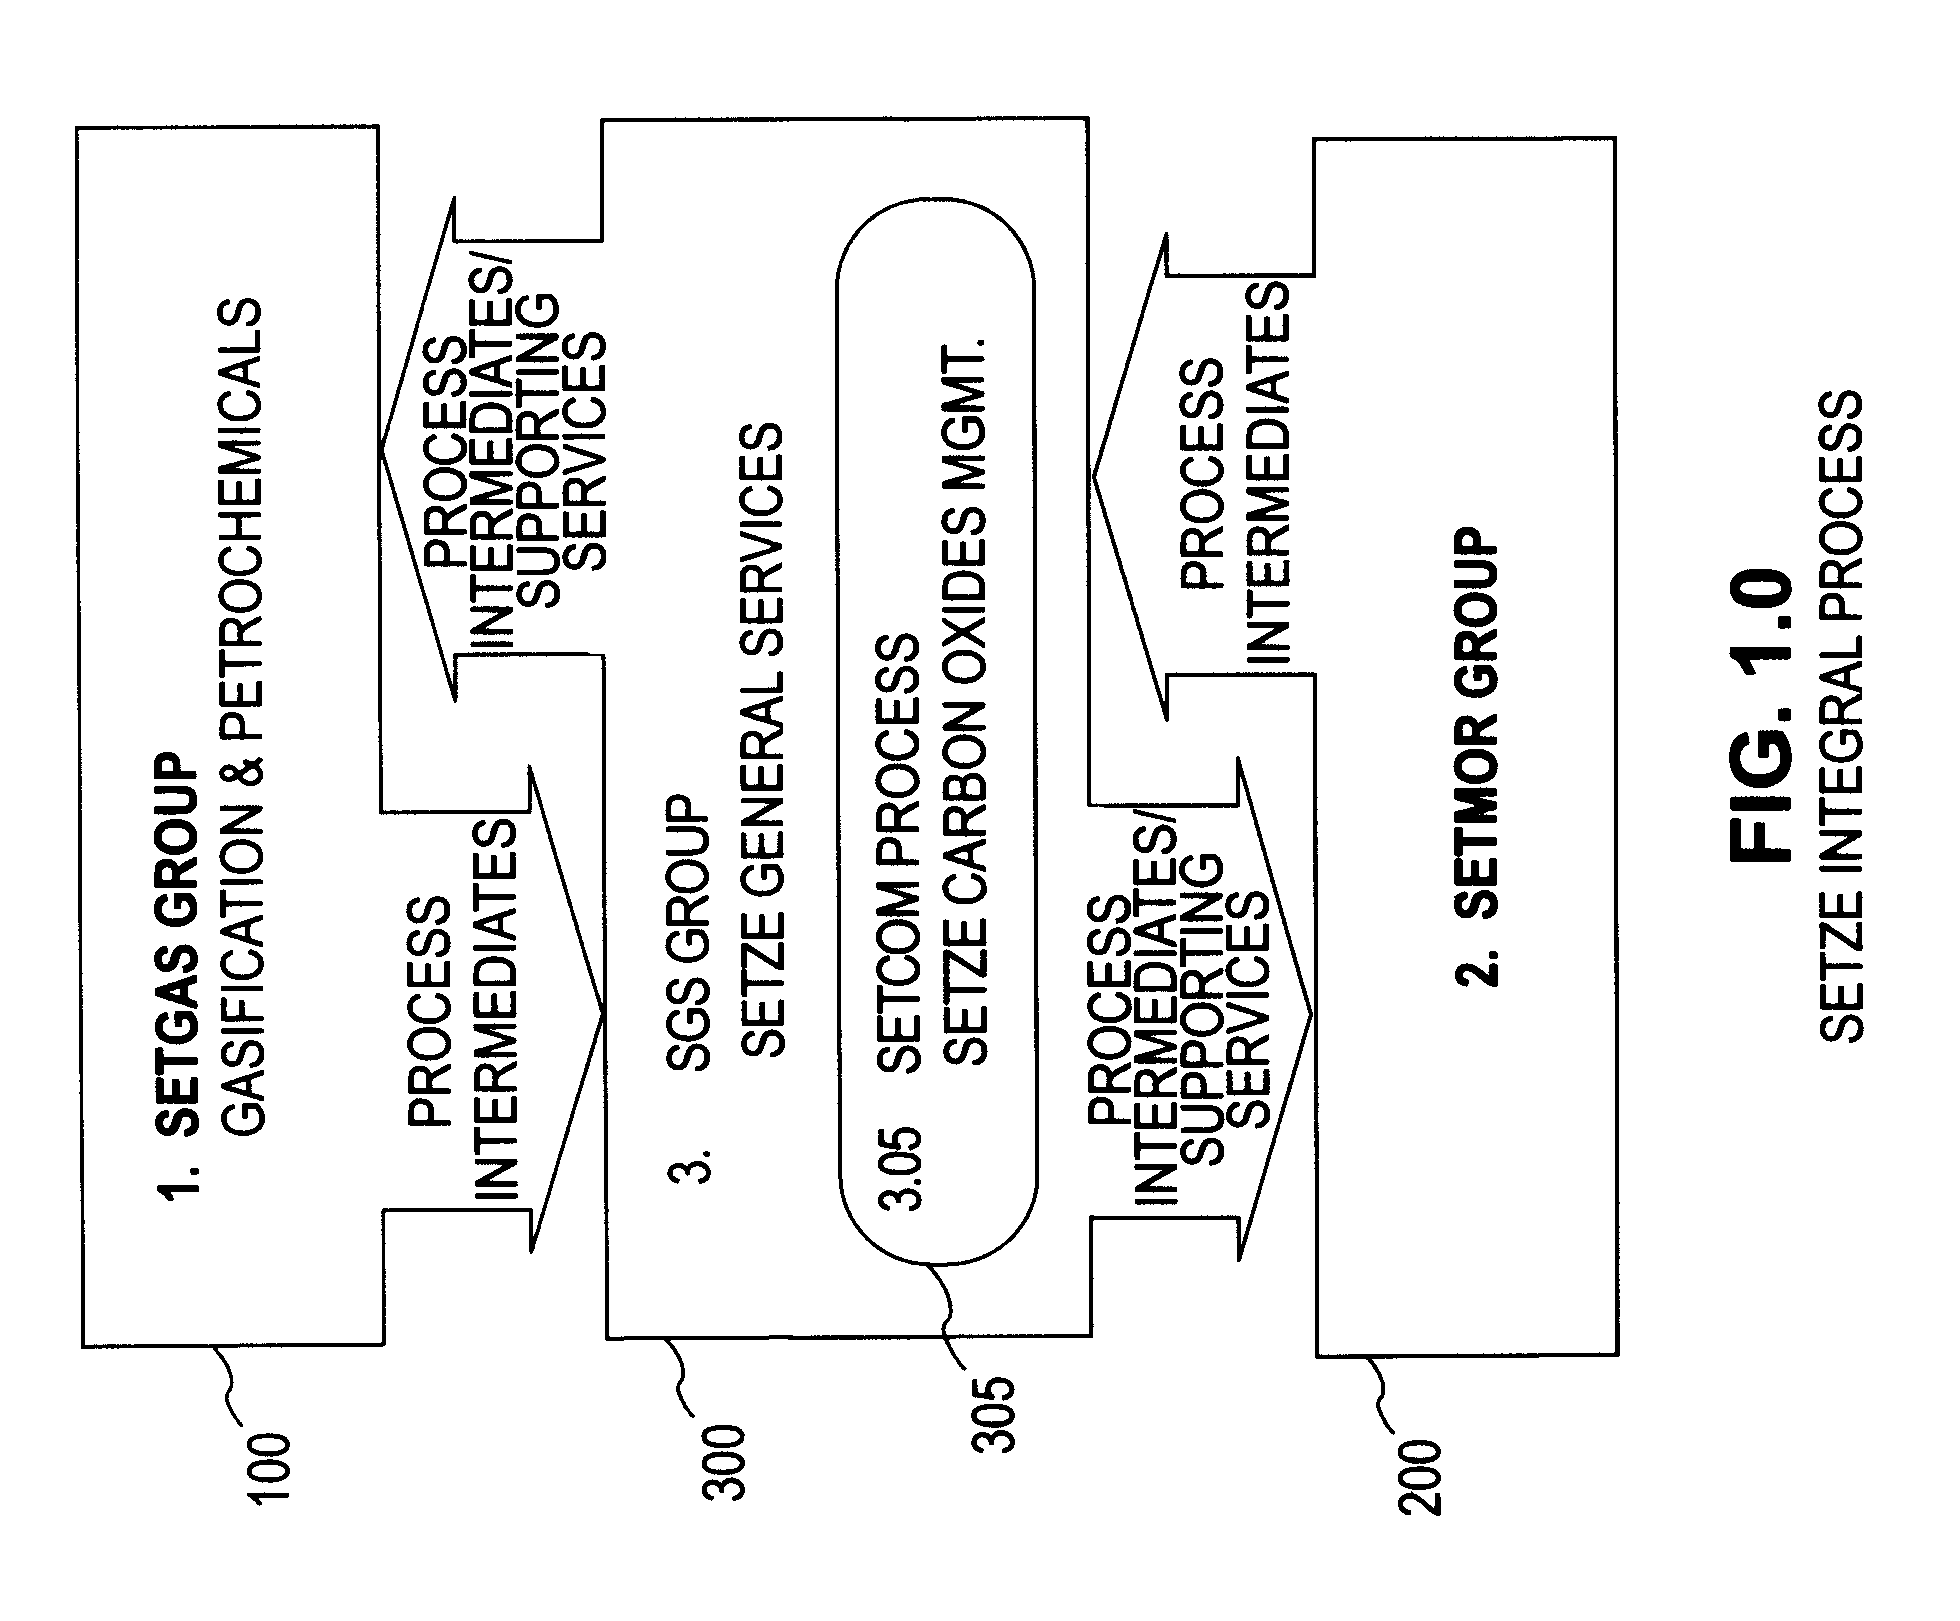 Zero emission gasification, power generation, carbon oxides management and metallurgical reduction processes, apparatus, systems, and integration thereof